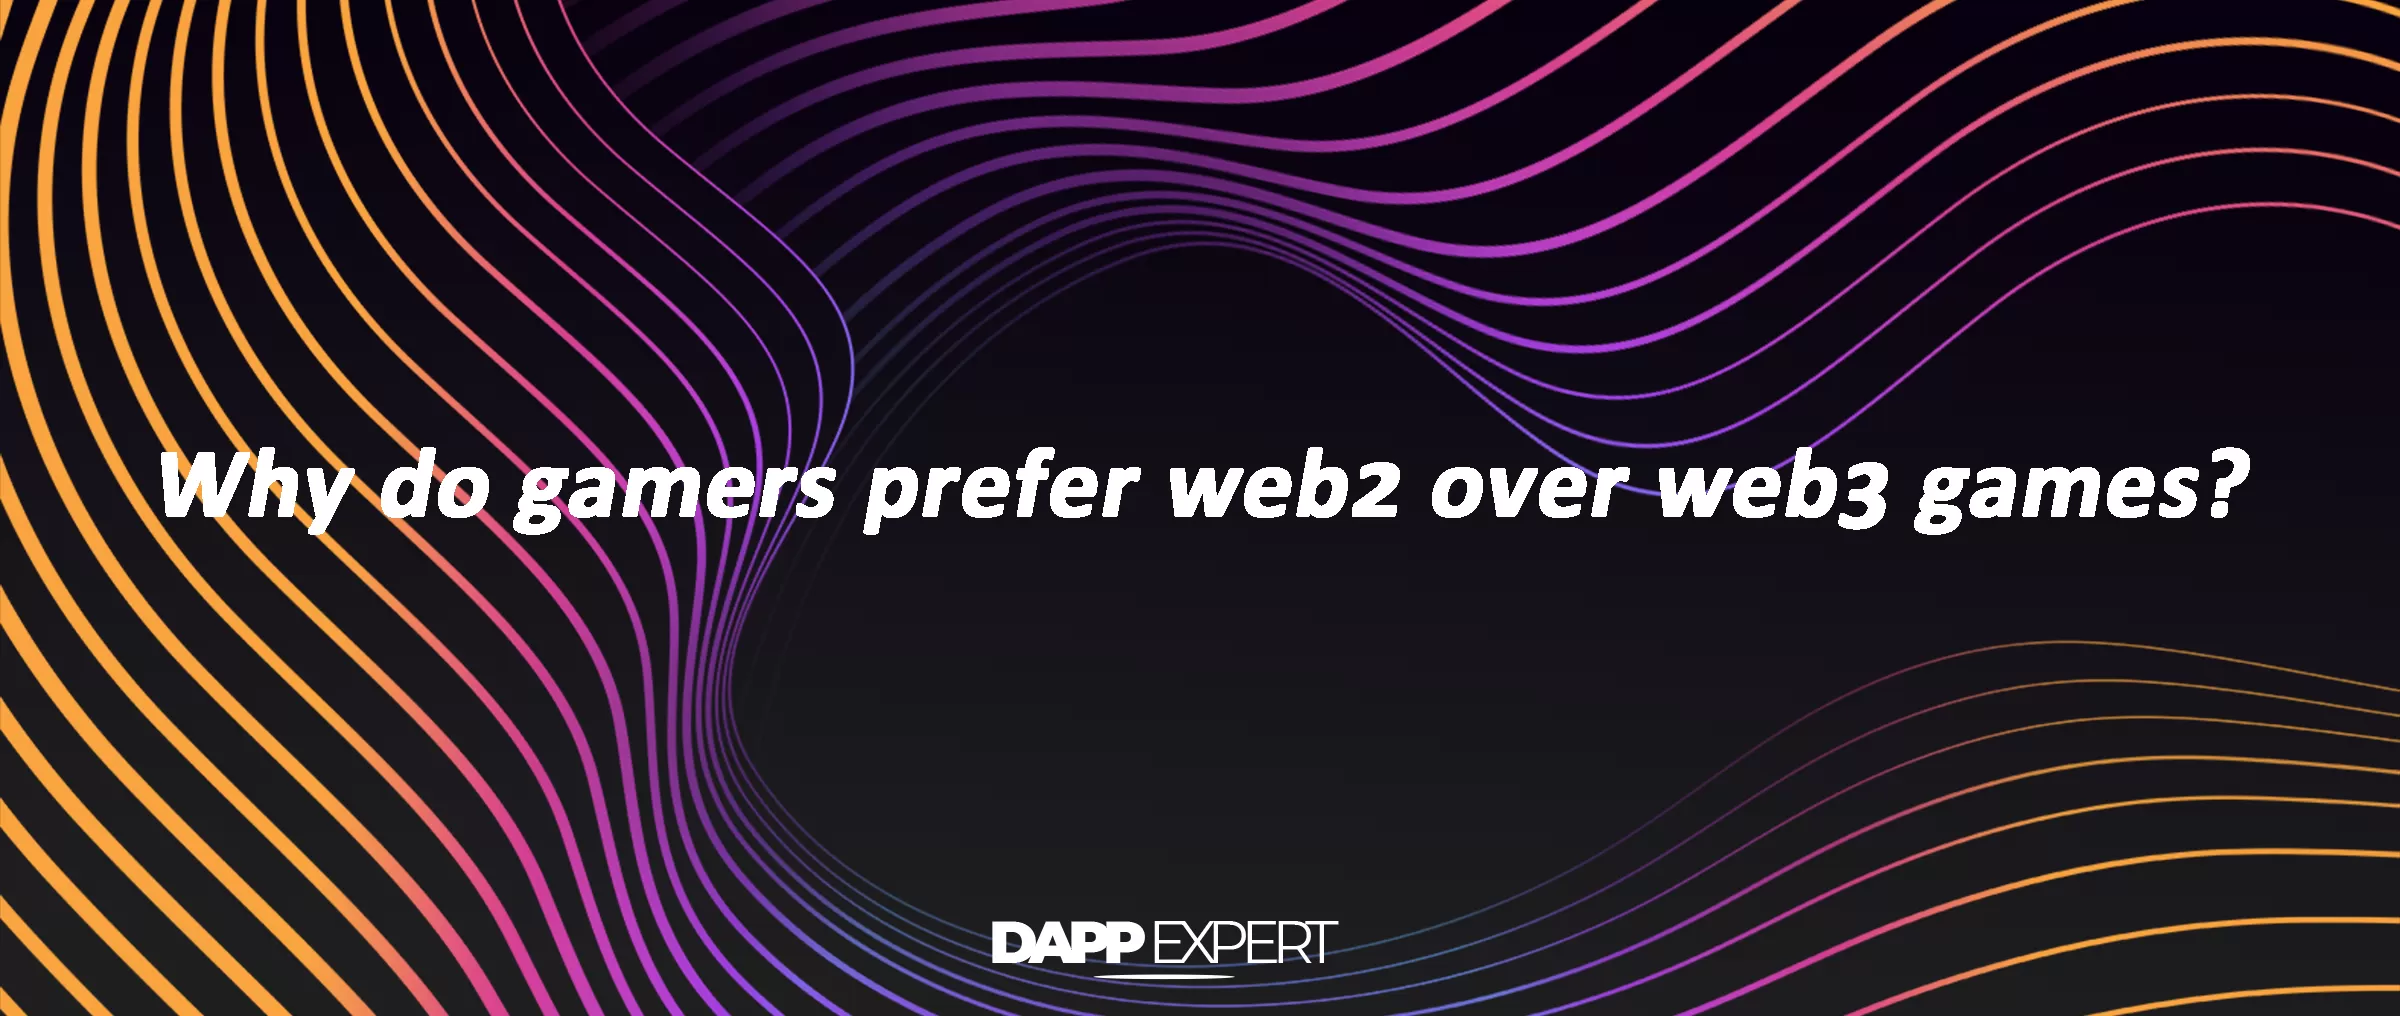 Why do gamers prefer web2 over web3 games?